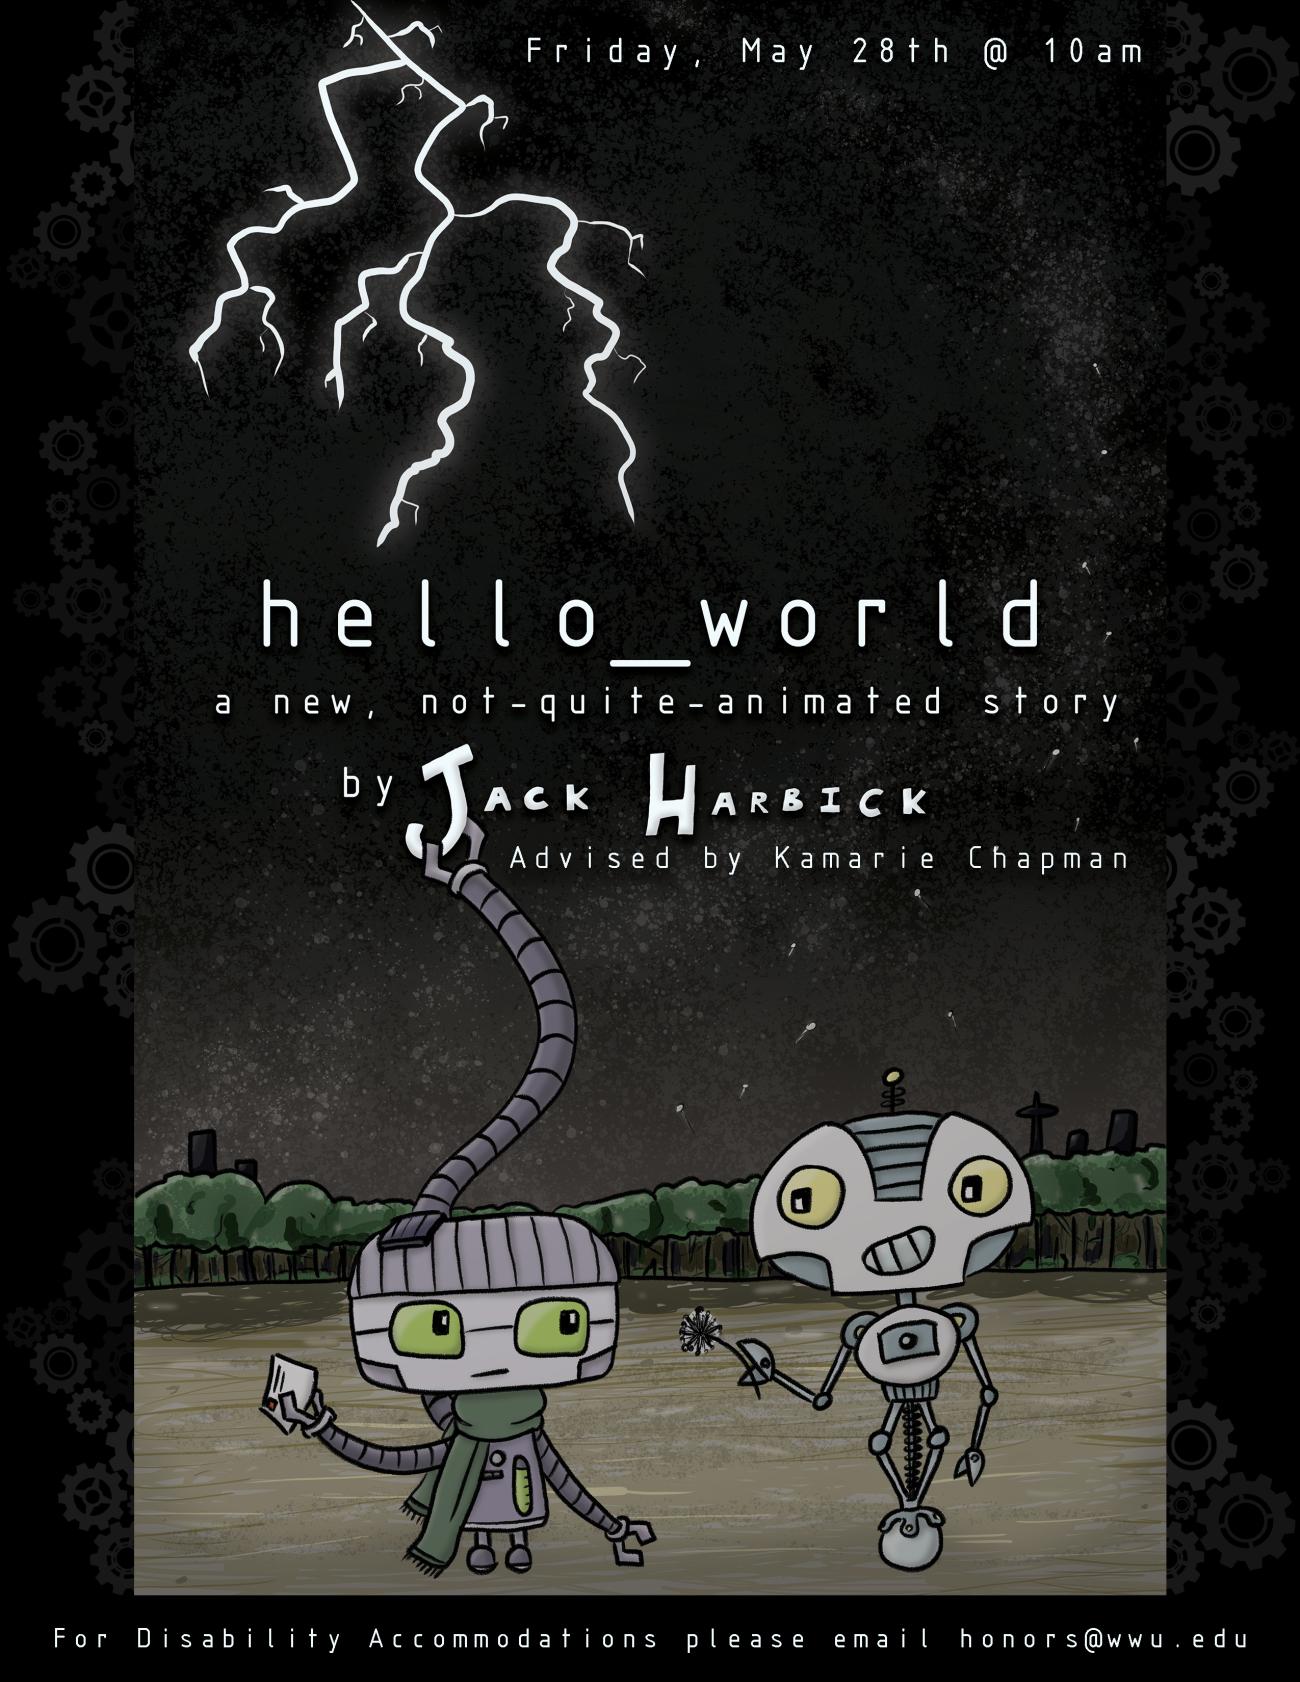 Digital drawing of two robots under a night sky, with lightning at the top. Text reads: "hello_world : a new, not quite animated story by Jack Harbick. Advised by Kamarie Chapman. Friday, May 28th at 10am. For disability accommodations please email honors@wwu.edu". 